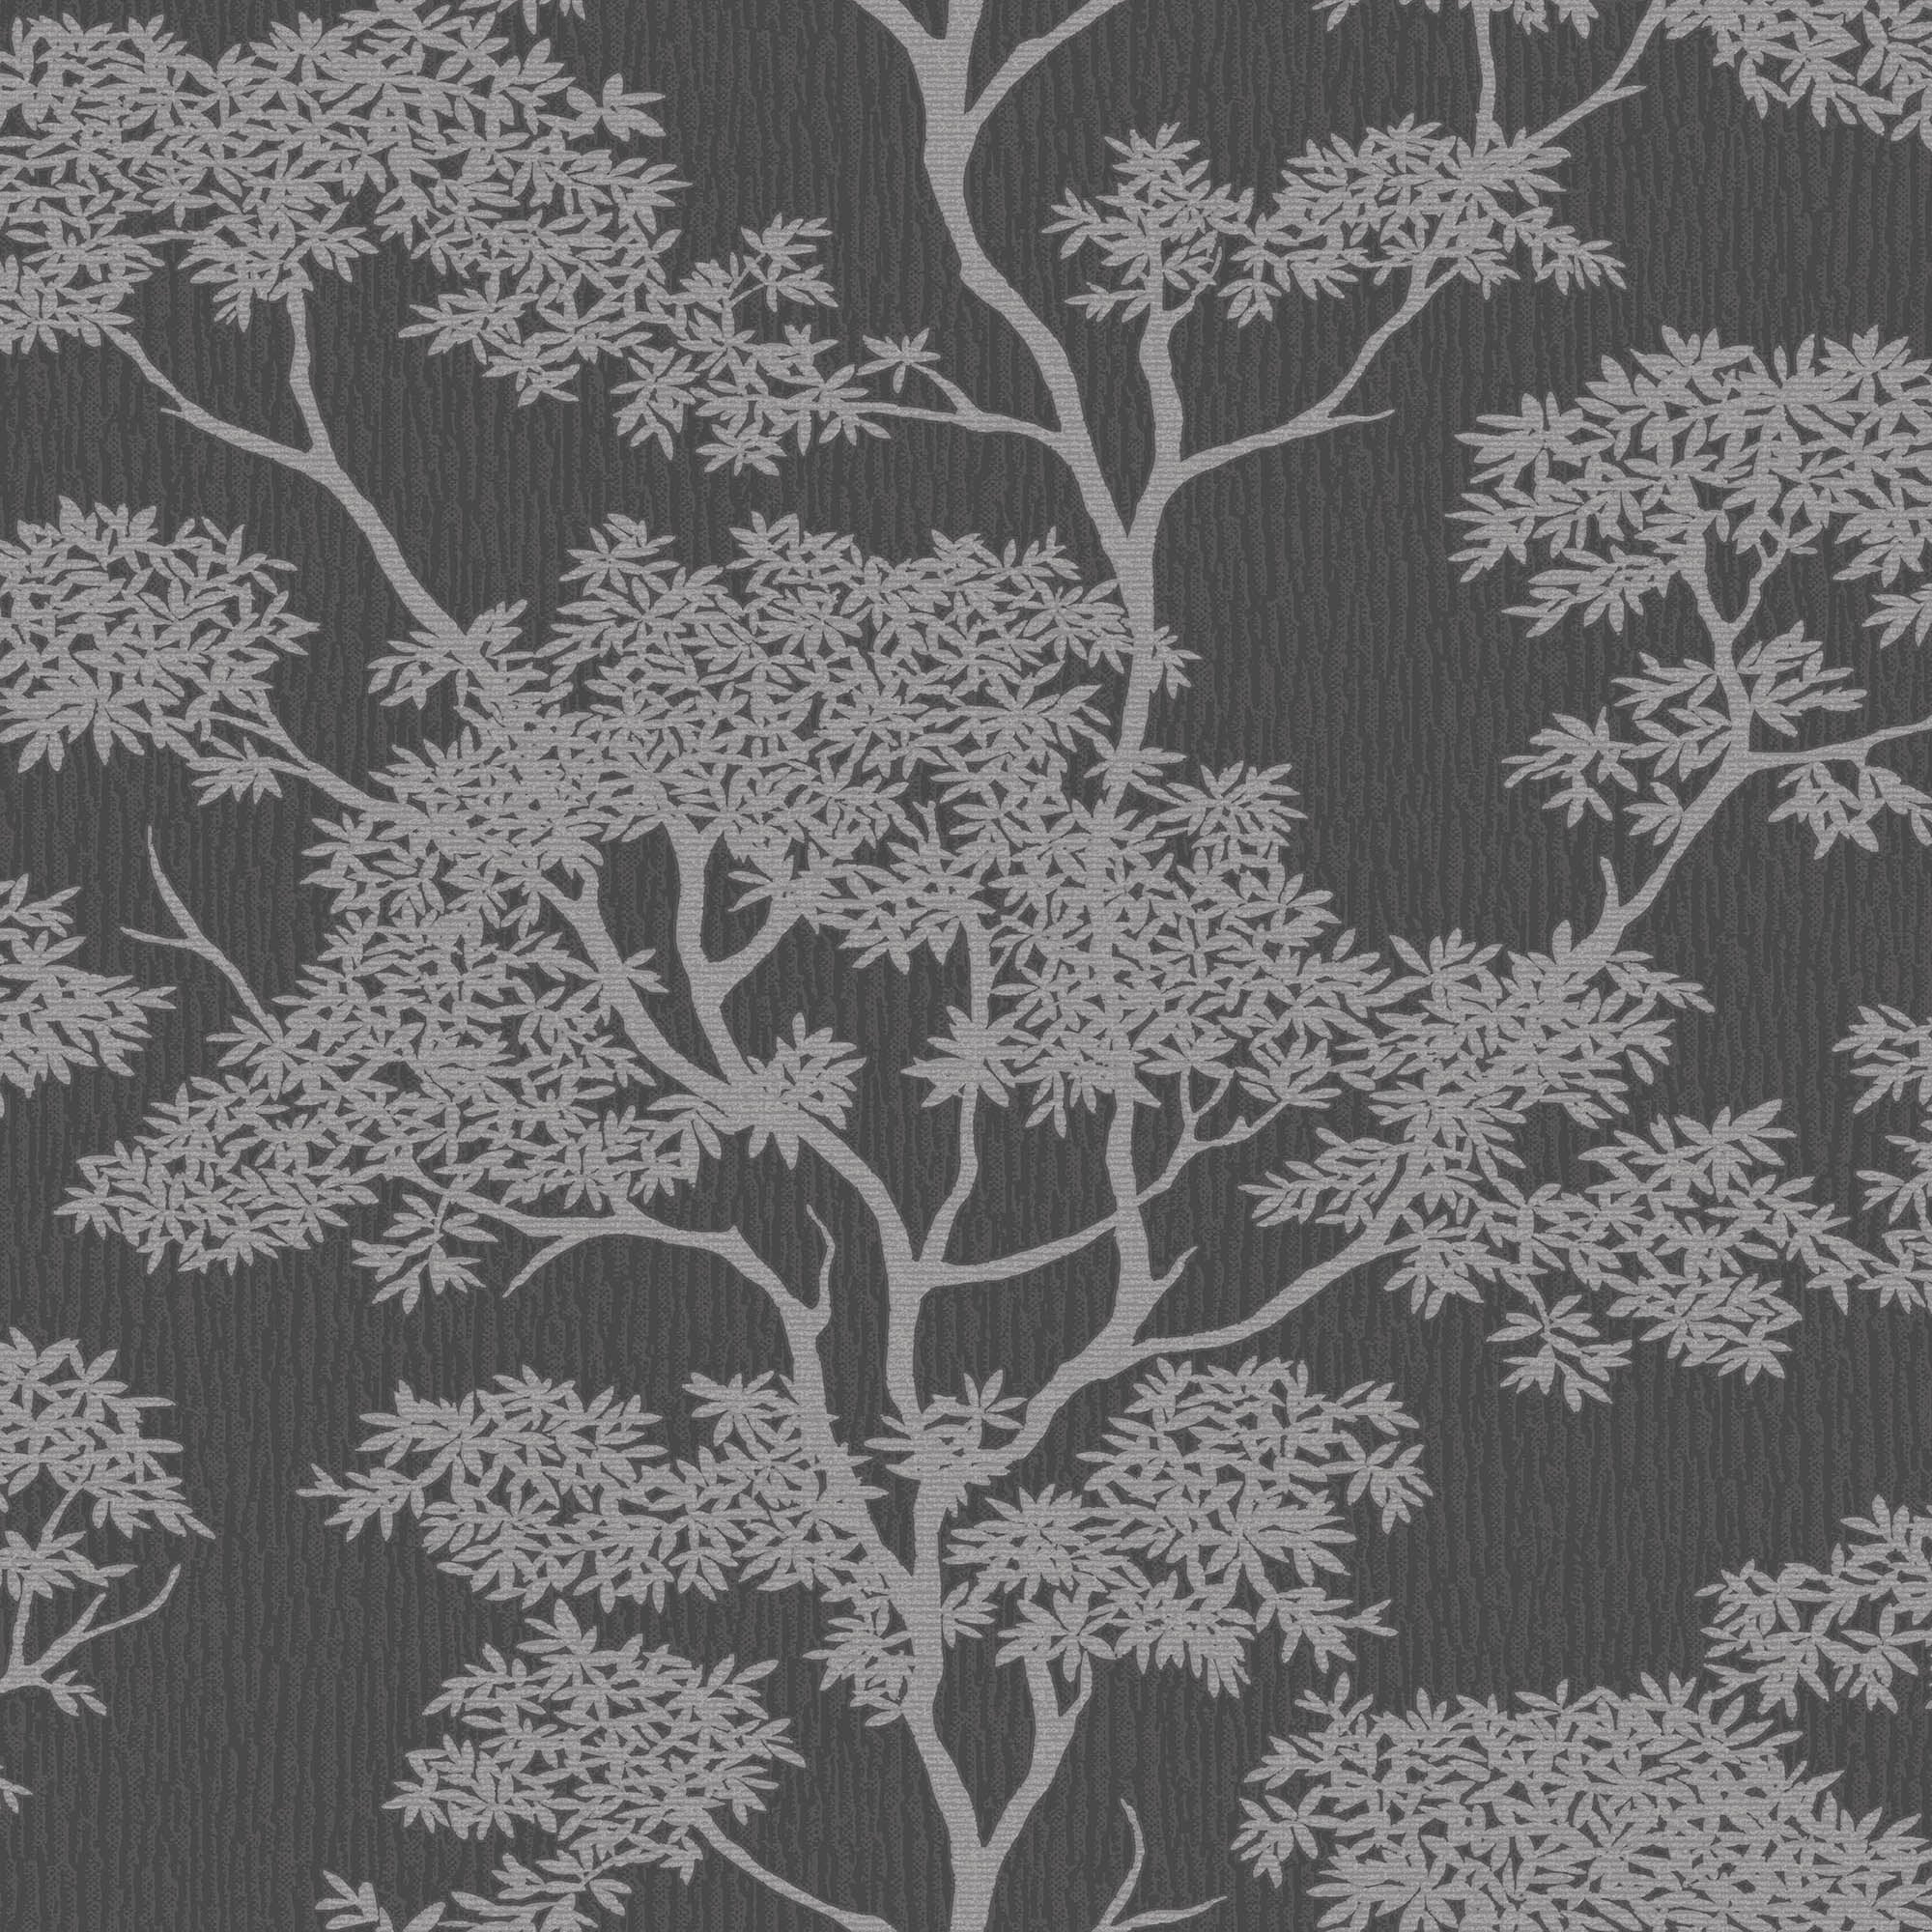 wallpaper glamour,pattern,cow parsley,lace,textile,botany